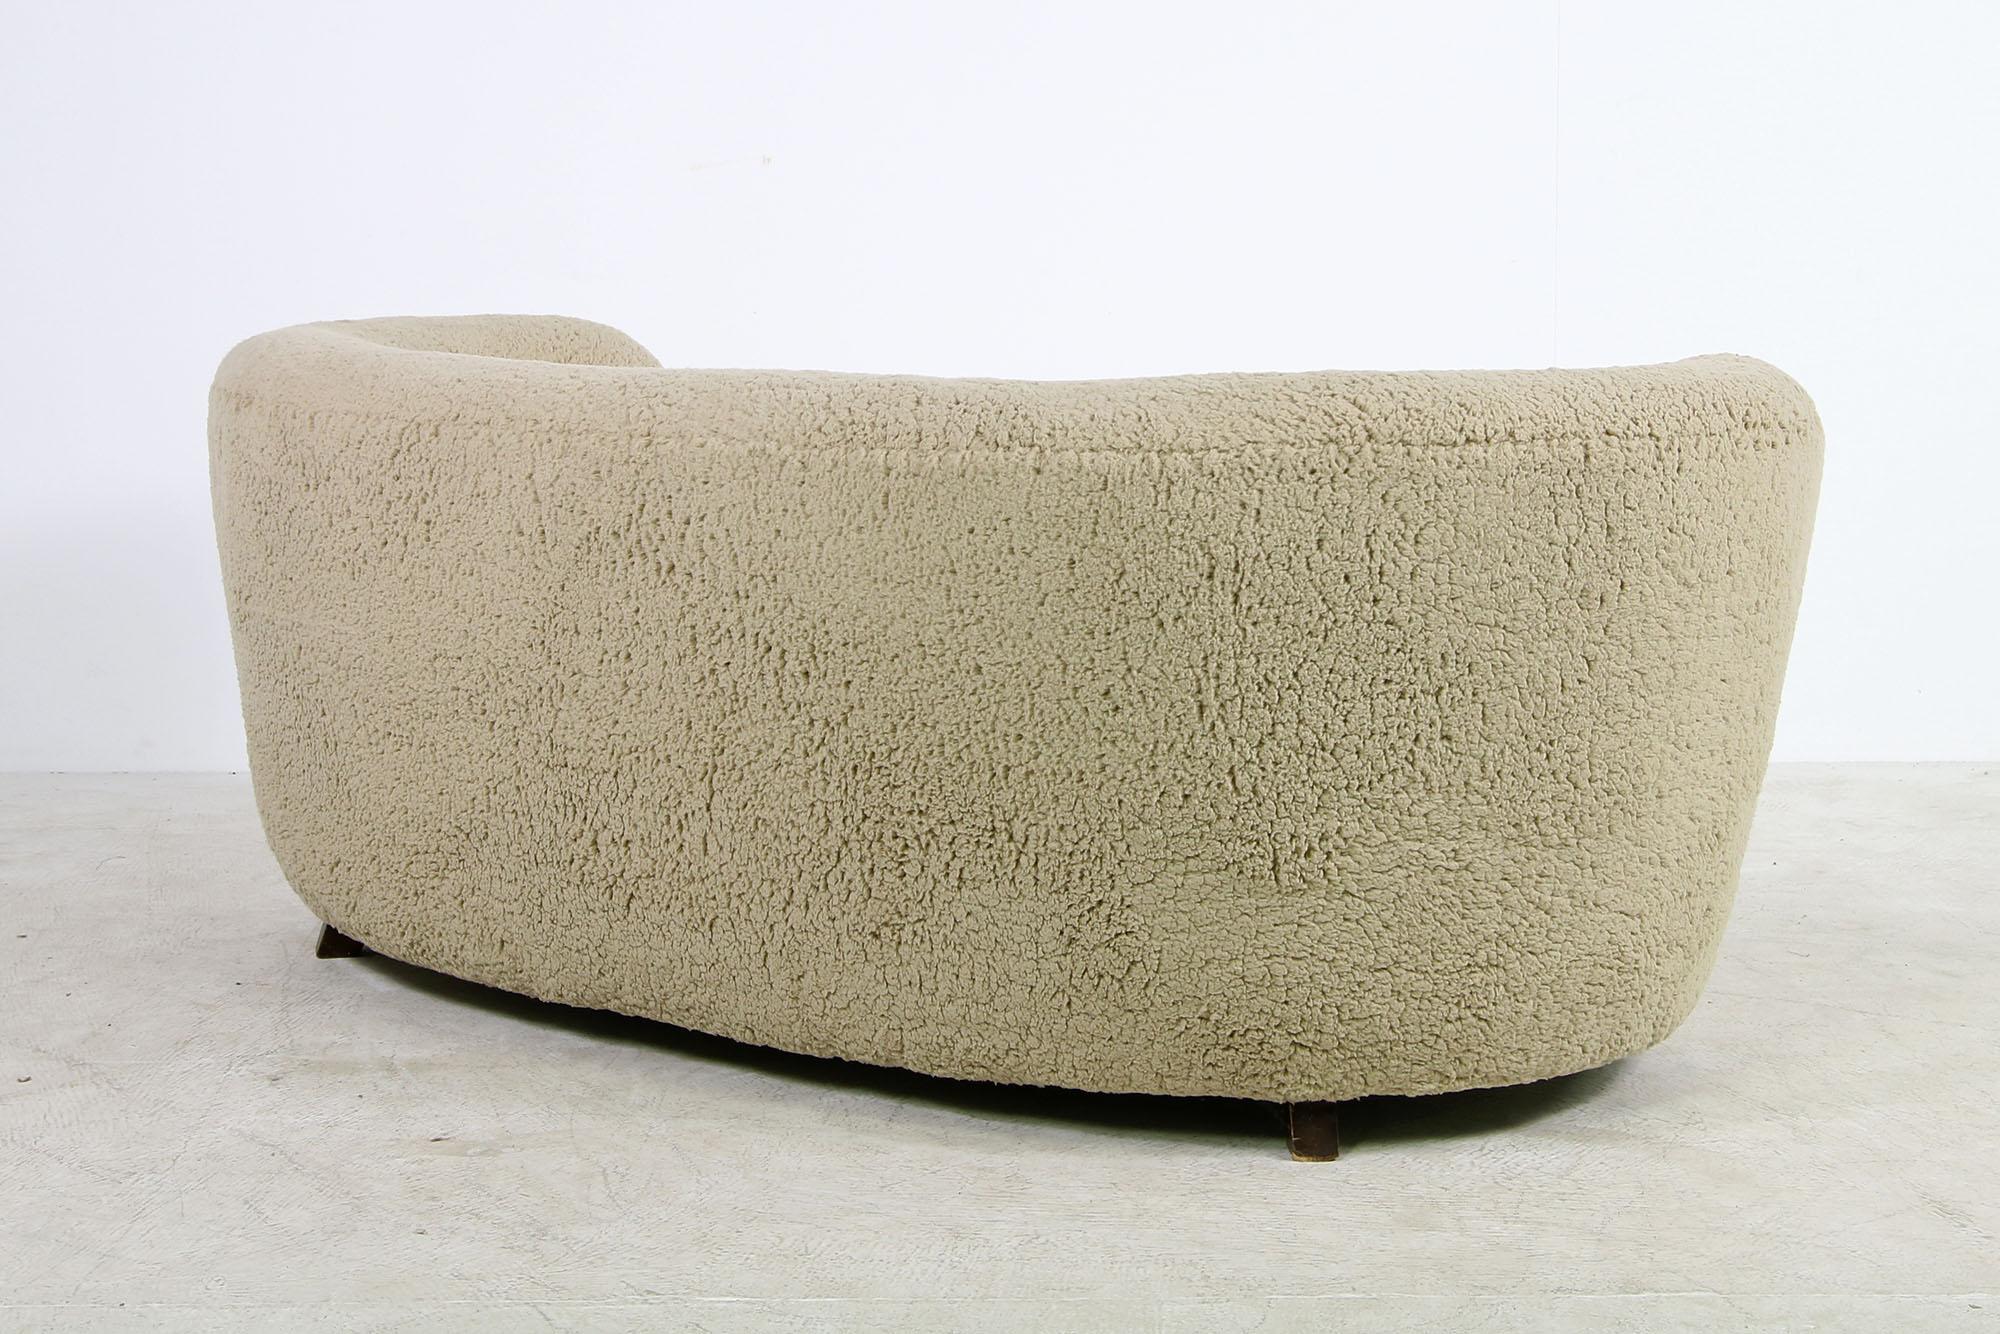 Mid-20th Century 1950s Danish Mid Curved Sofa, Teddy Fur & Tufted Leather, Faux Fur Sheepskin For Sale